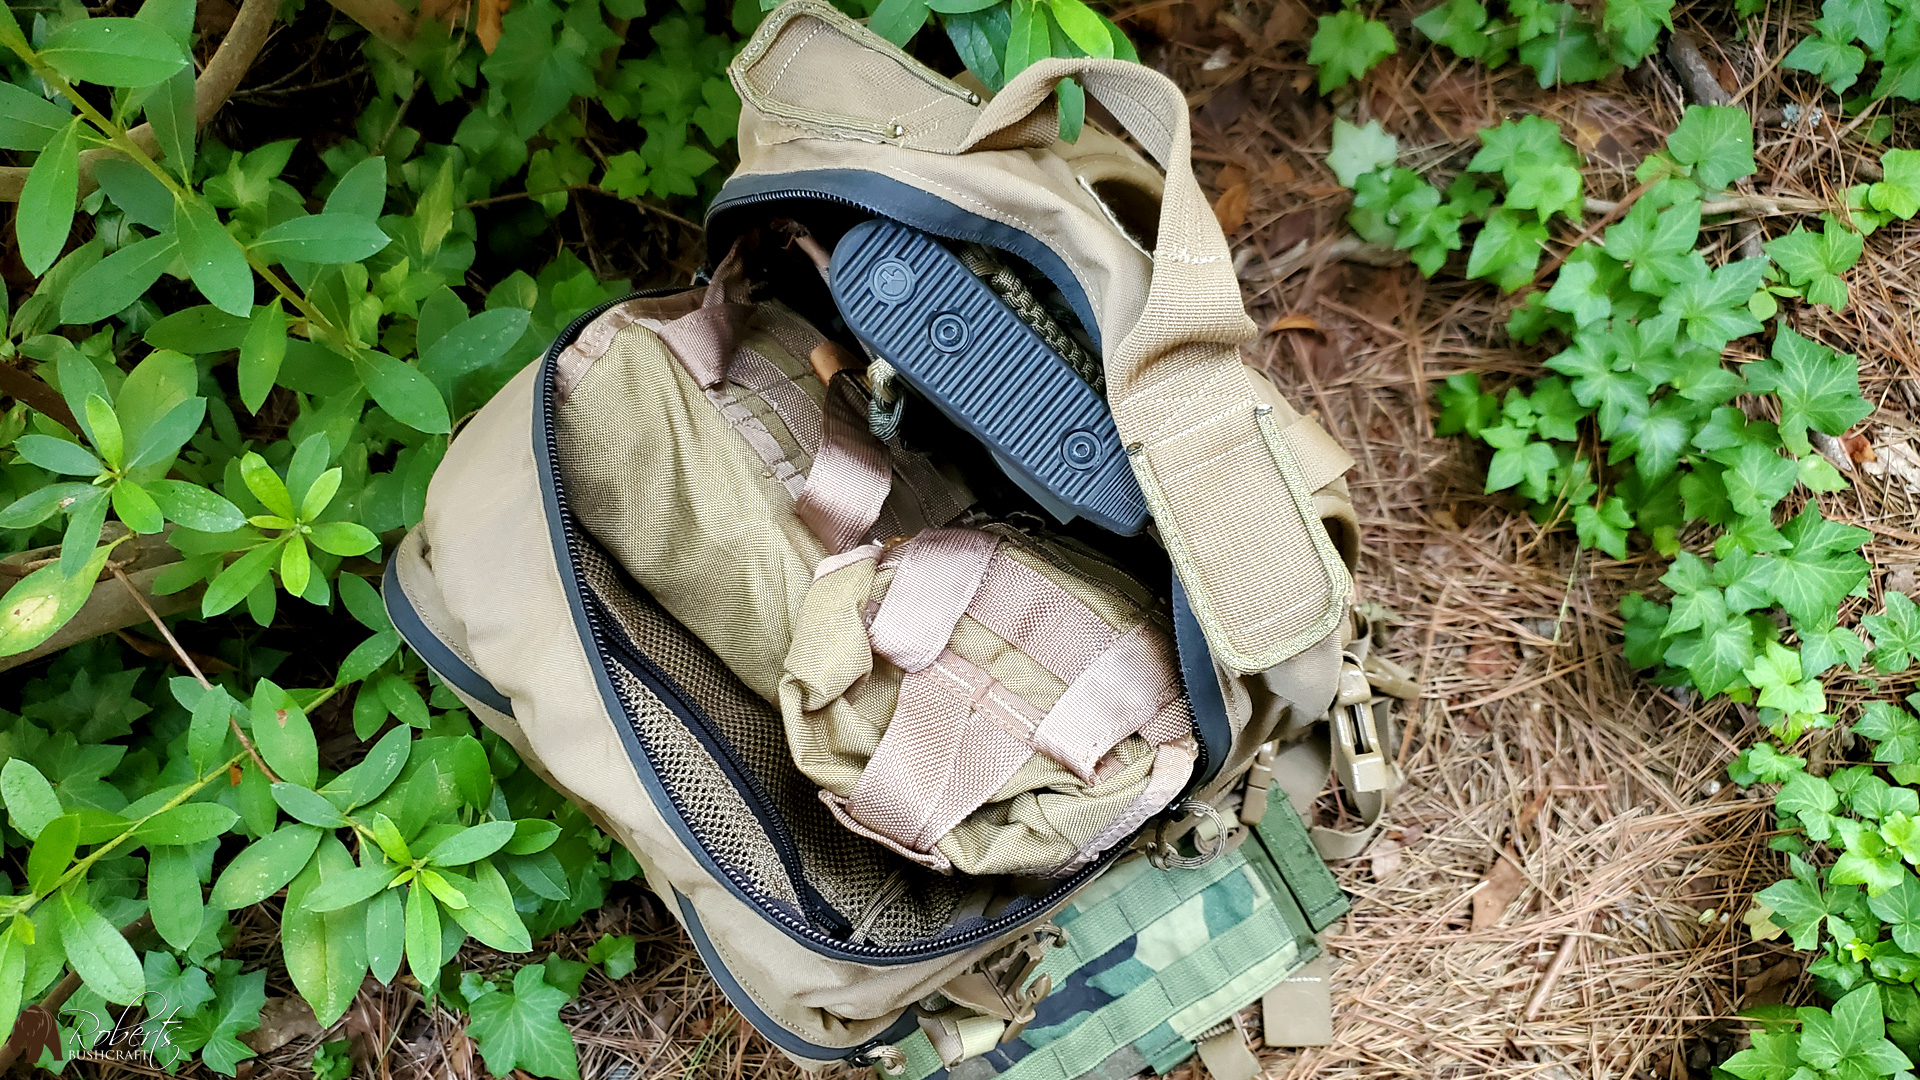 Ruger 10/22 Takedown with Magpul X-22 Backpacker Stock fits inside of the USMC Assault Pack